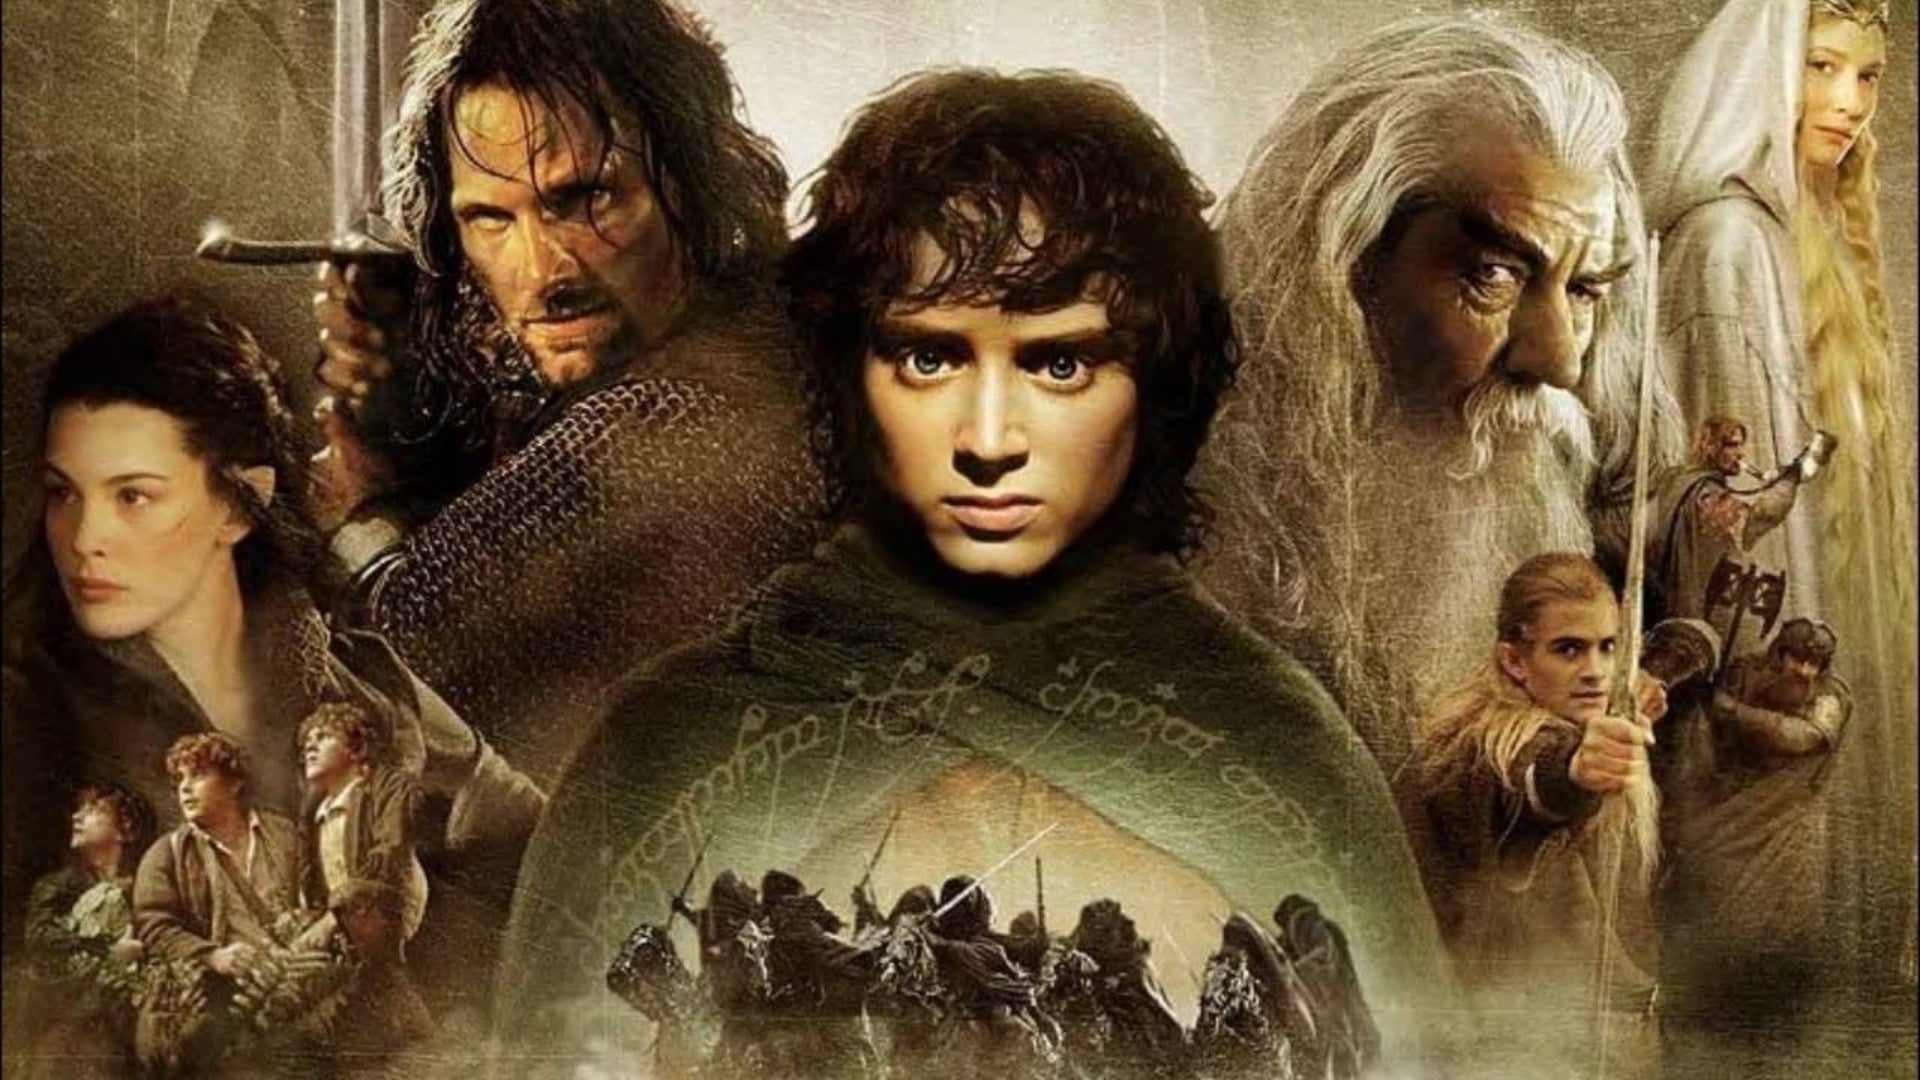 LotR movies were nothing but perfection